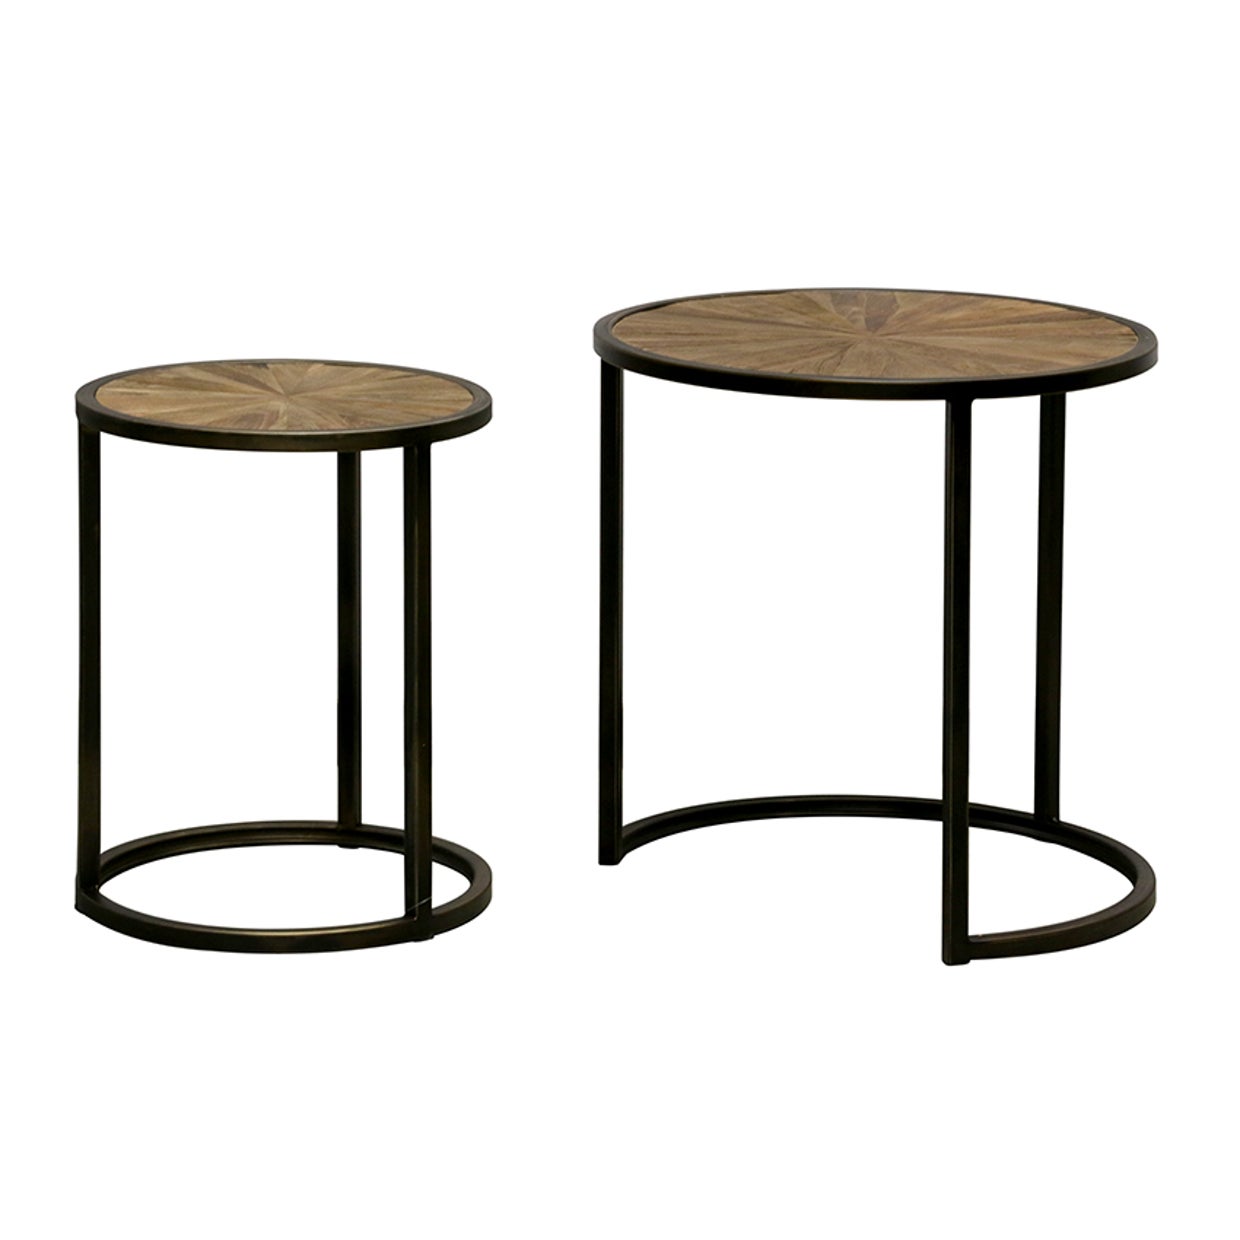 Cairo Set of 2 Occasional Tables with old Round Pine Parquet Tops & Steel Antiqued Bronze Legs